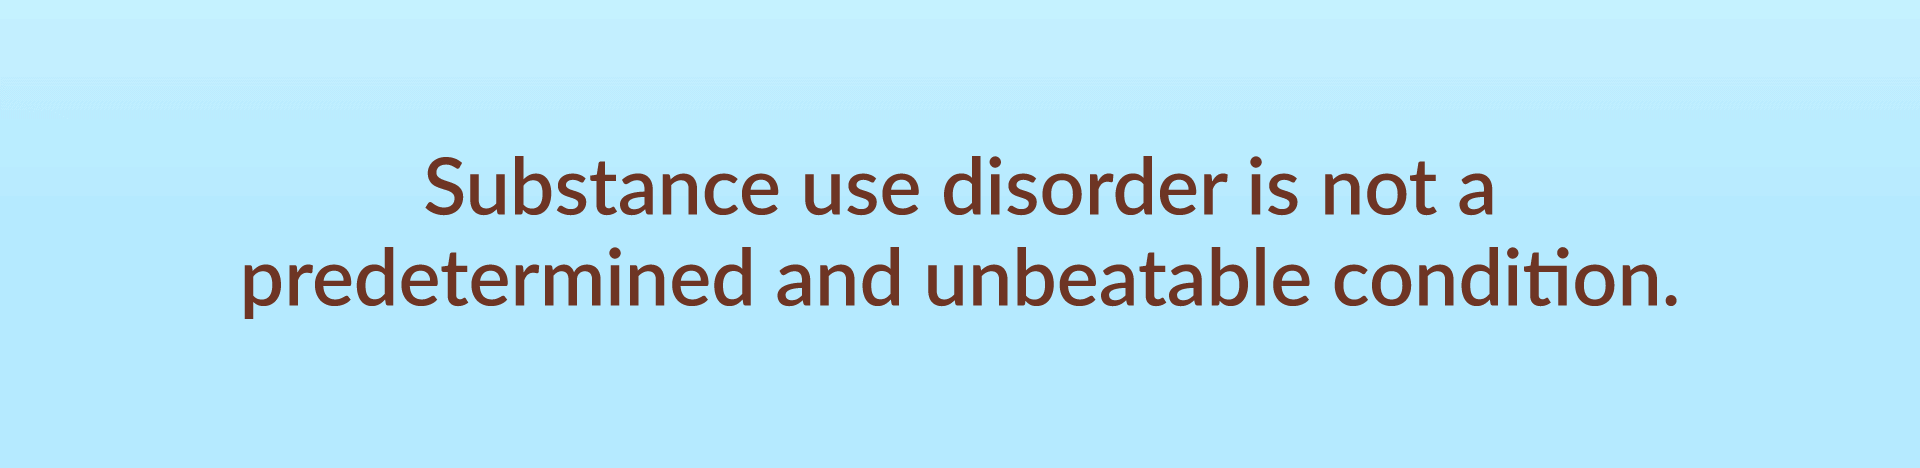 substance use disorder is not a predetermined and ubeatable condition